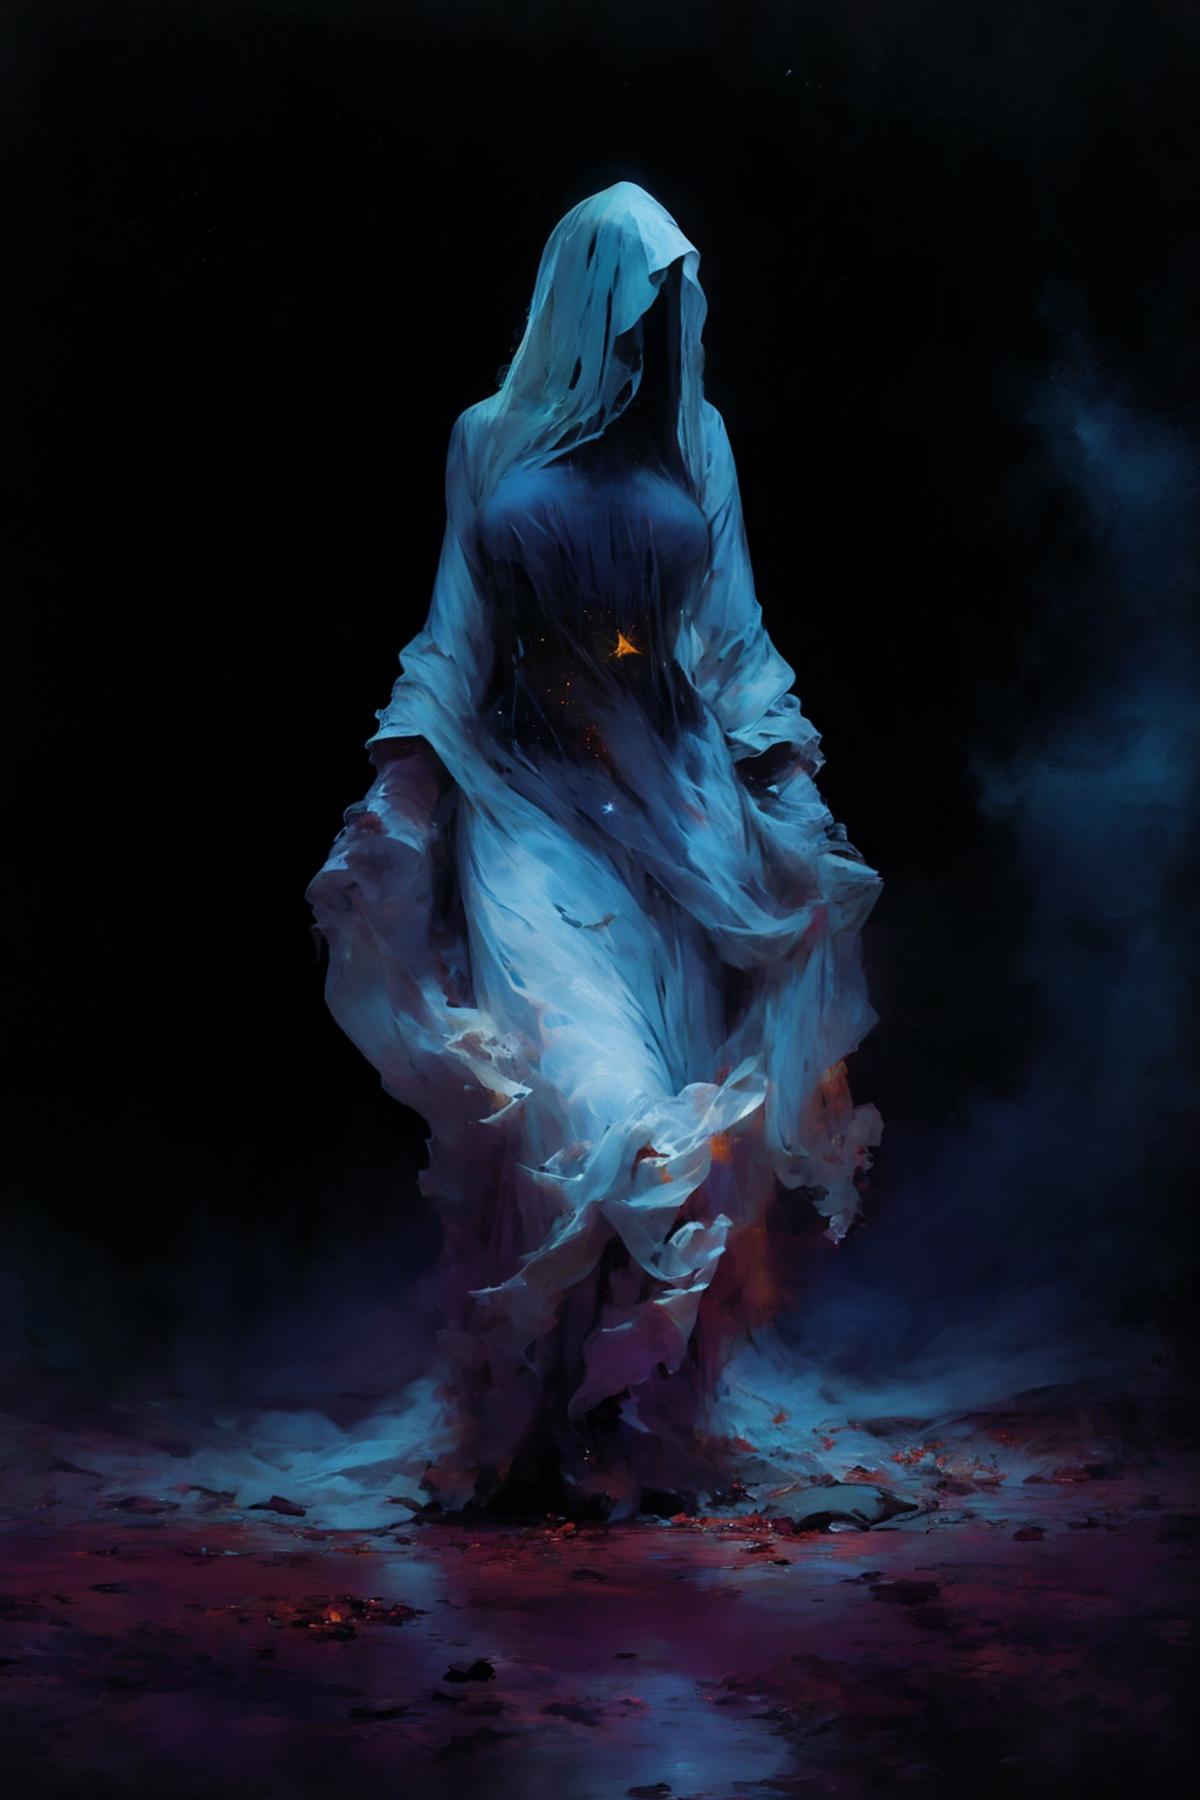 A dark and mysterious painting of a woman in a flowing dress.